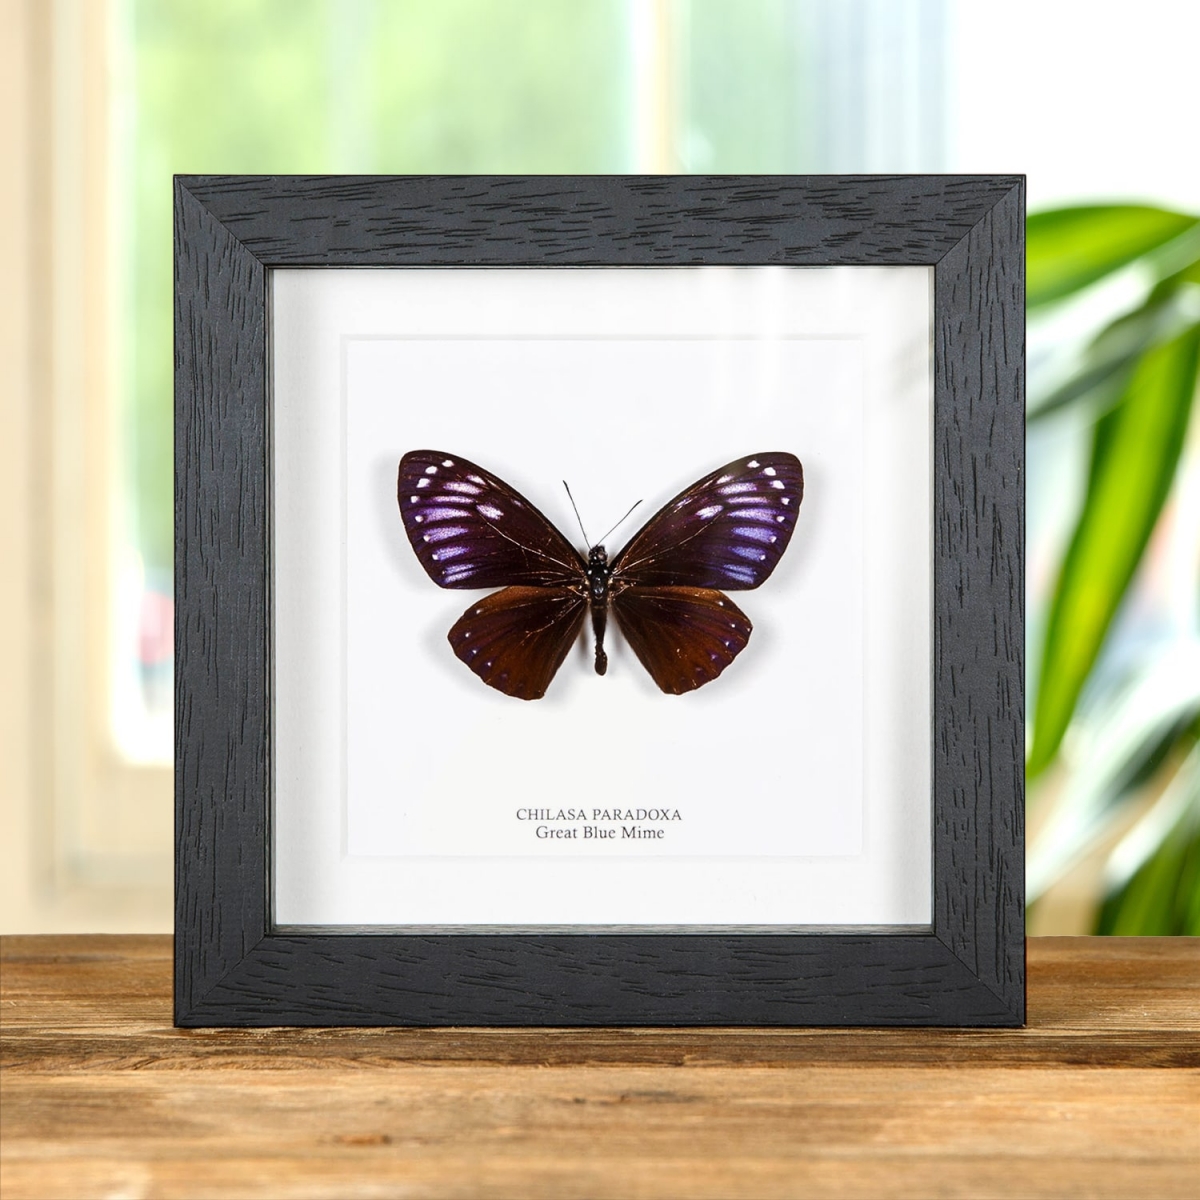 Minibeast Rare Great Blue Mime In Box Frame (Papilio paradoxa)